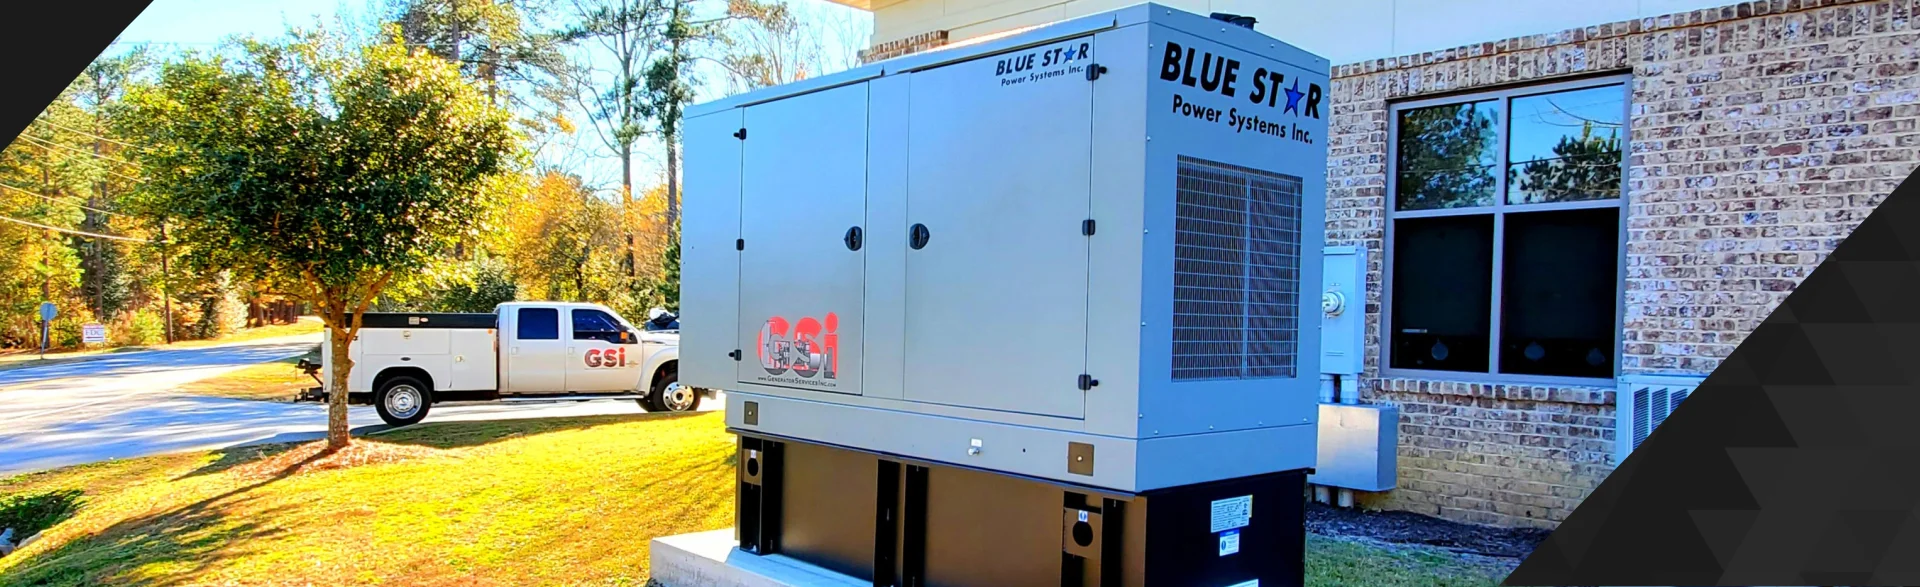 Large generator outdoors with a blurred background